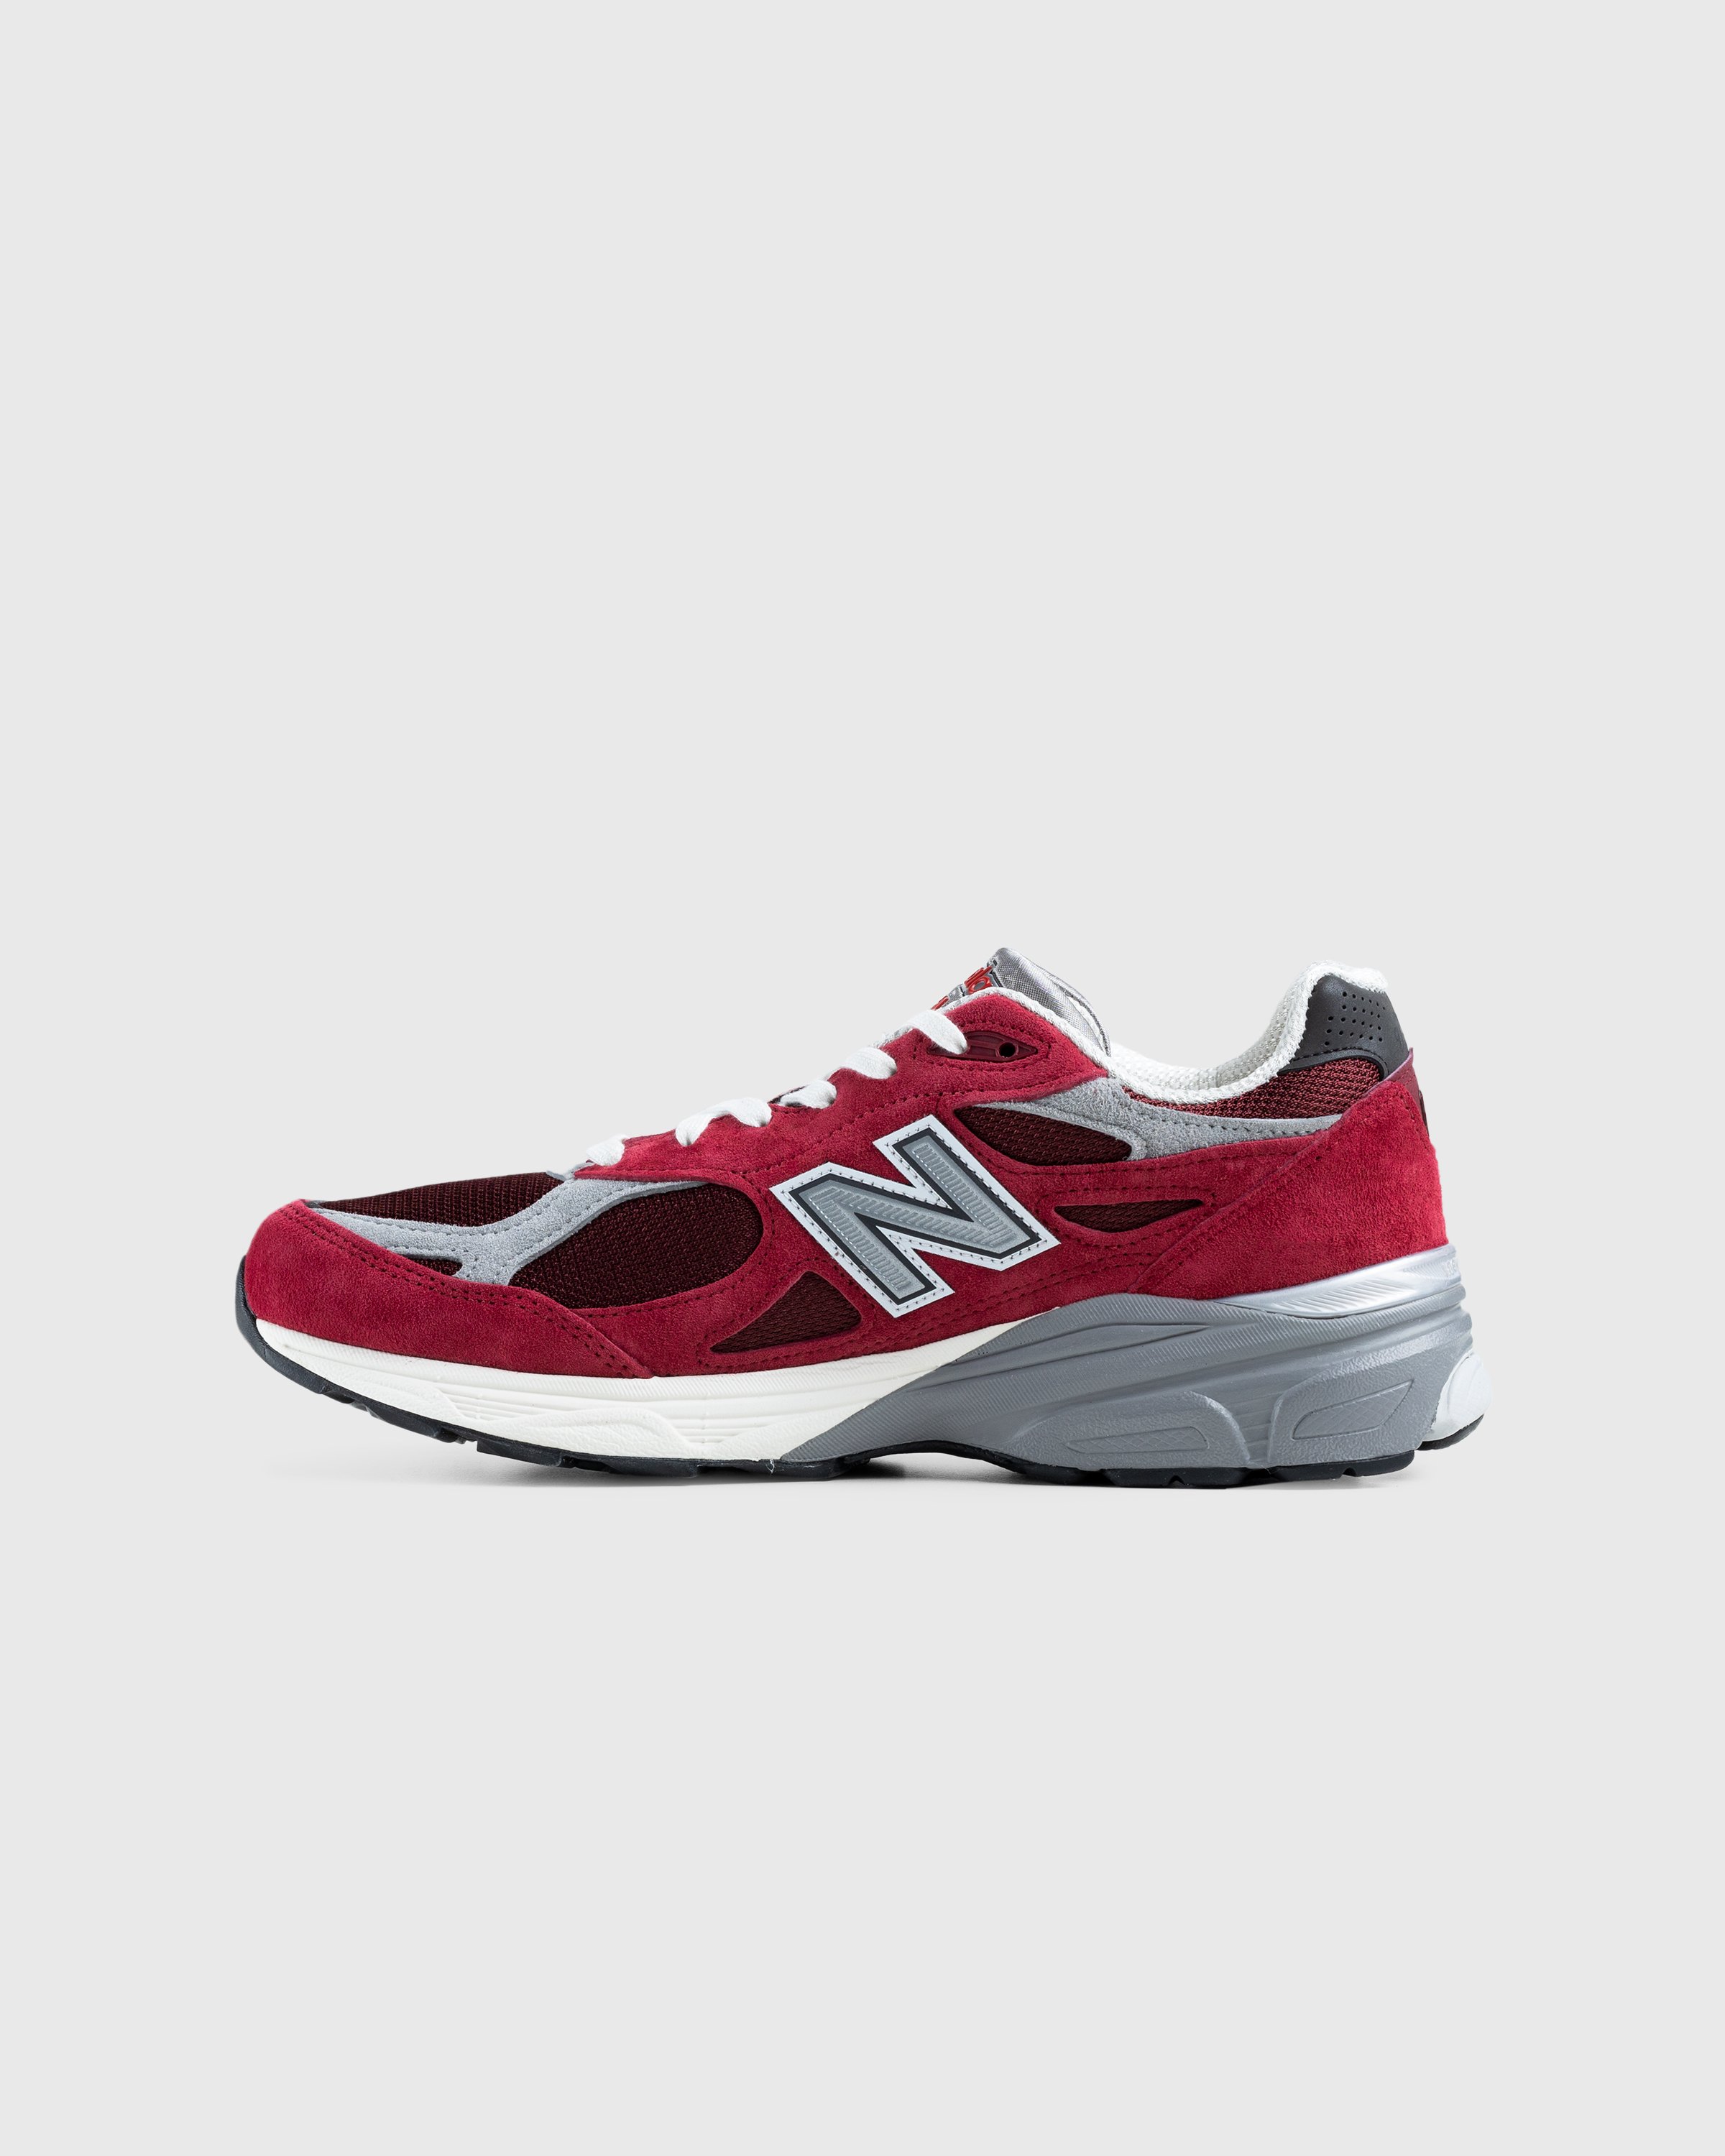 New Balance - M990TF3 Red - Footwear - Red - Image 2